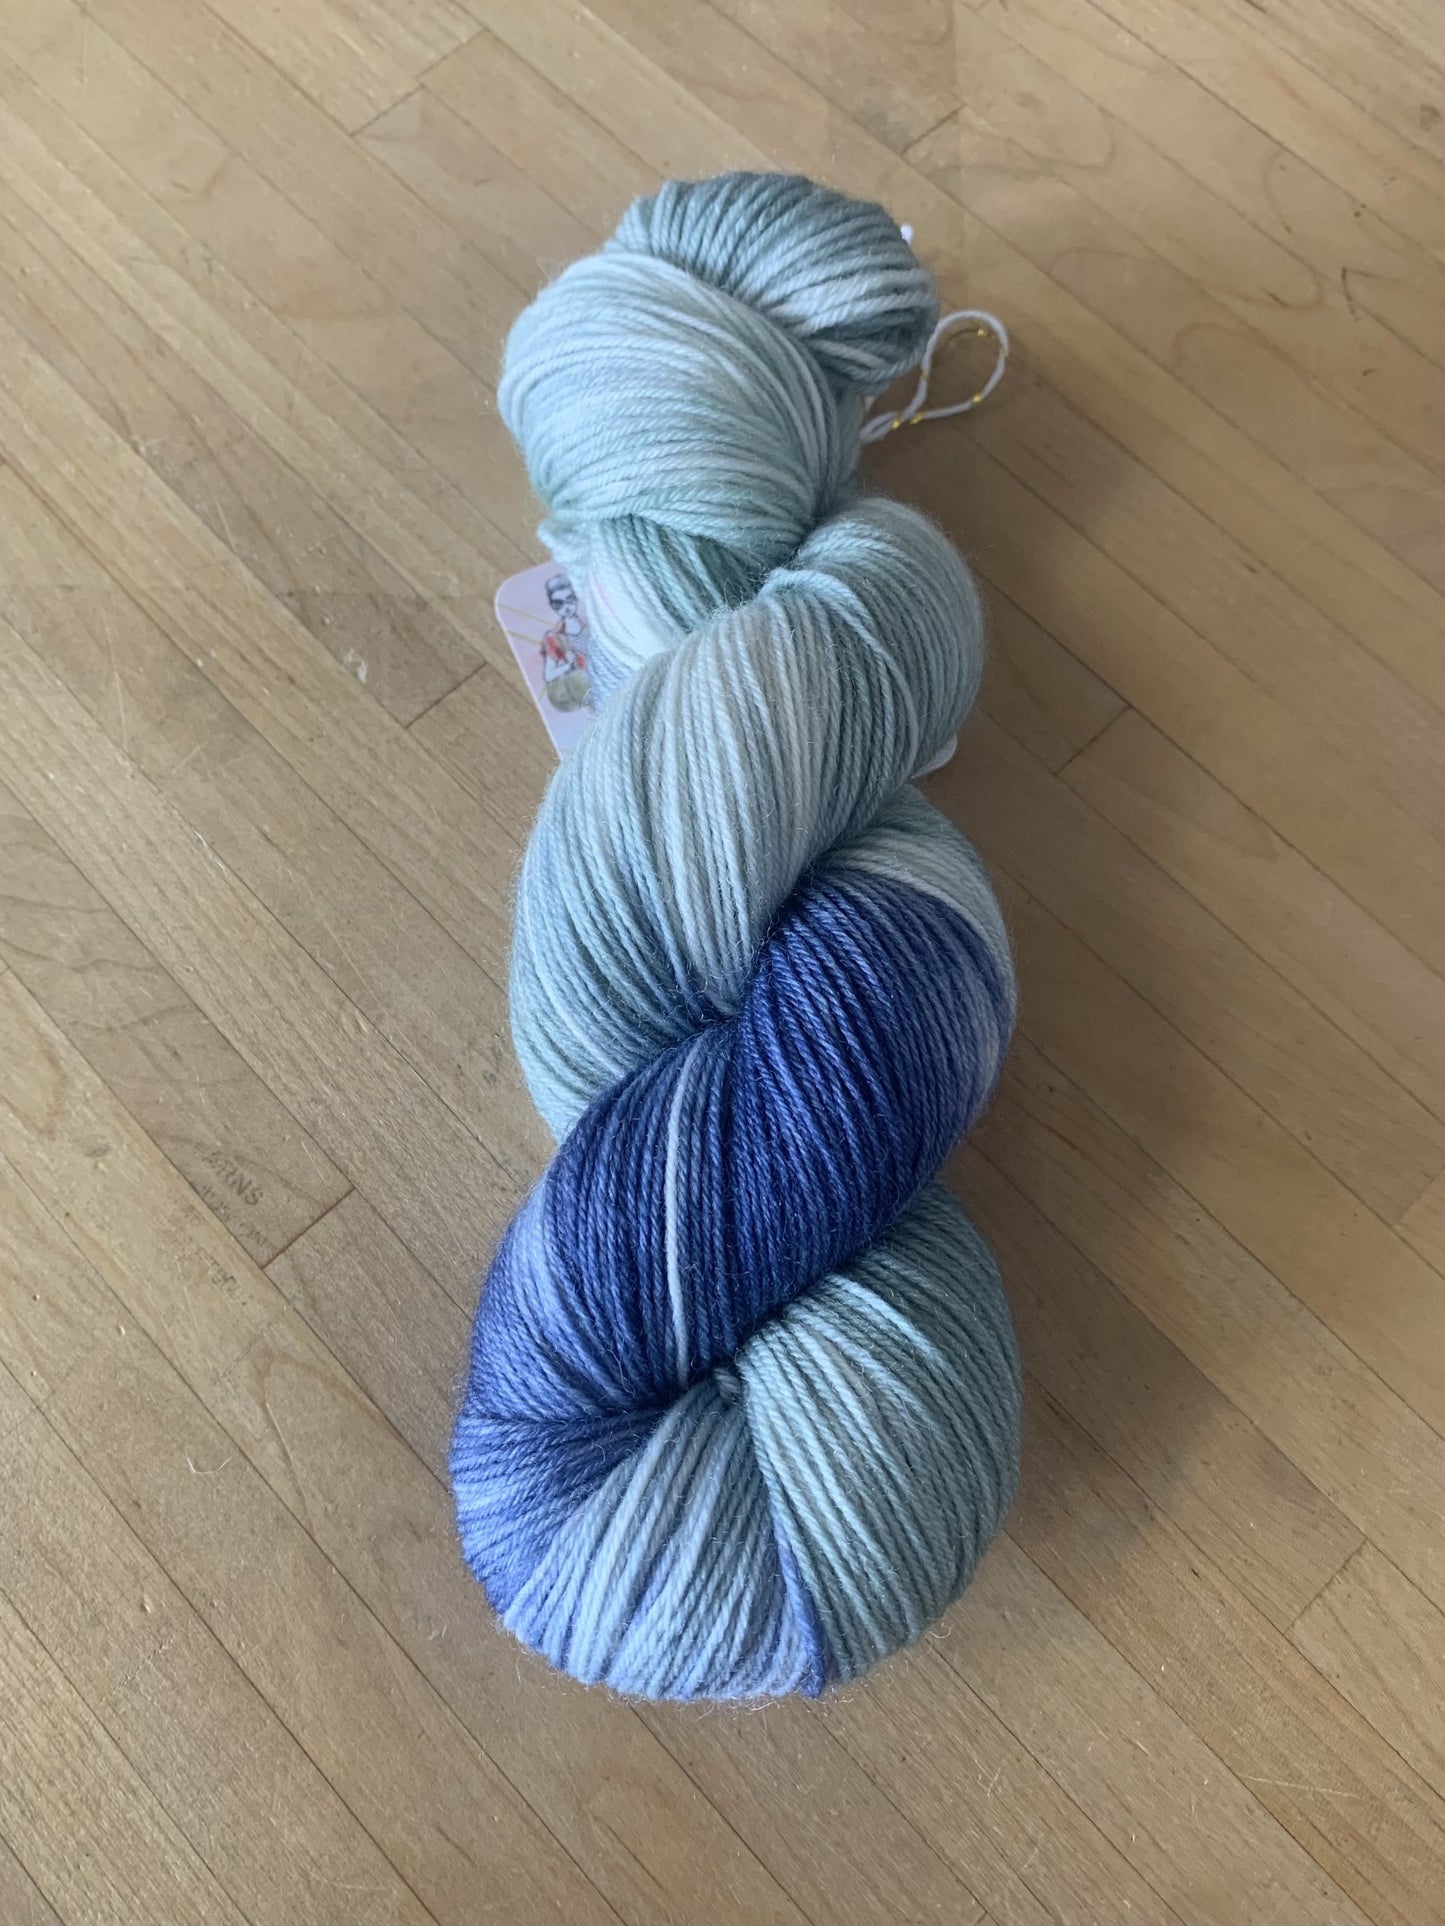 Hand-dyed Fingering Weight Yarn